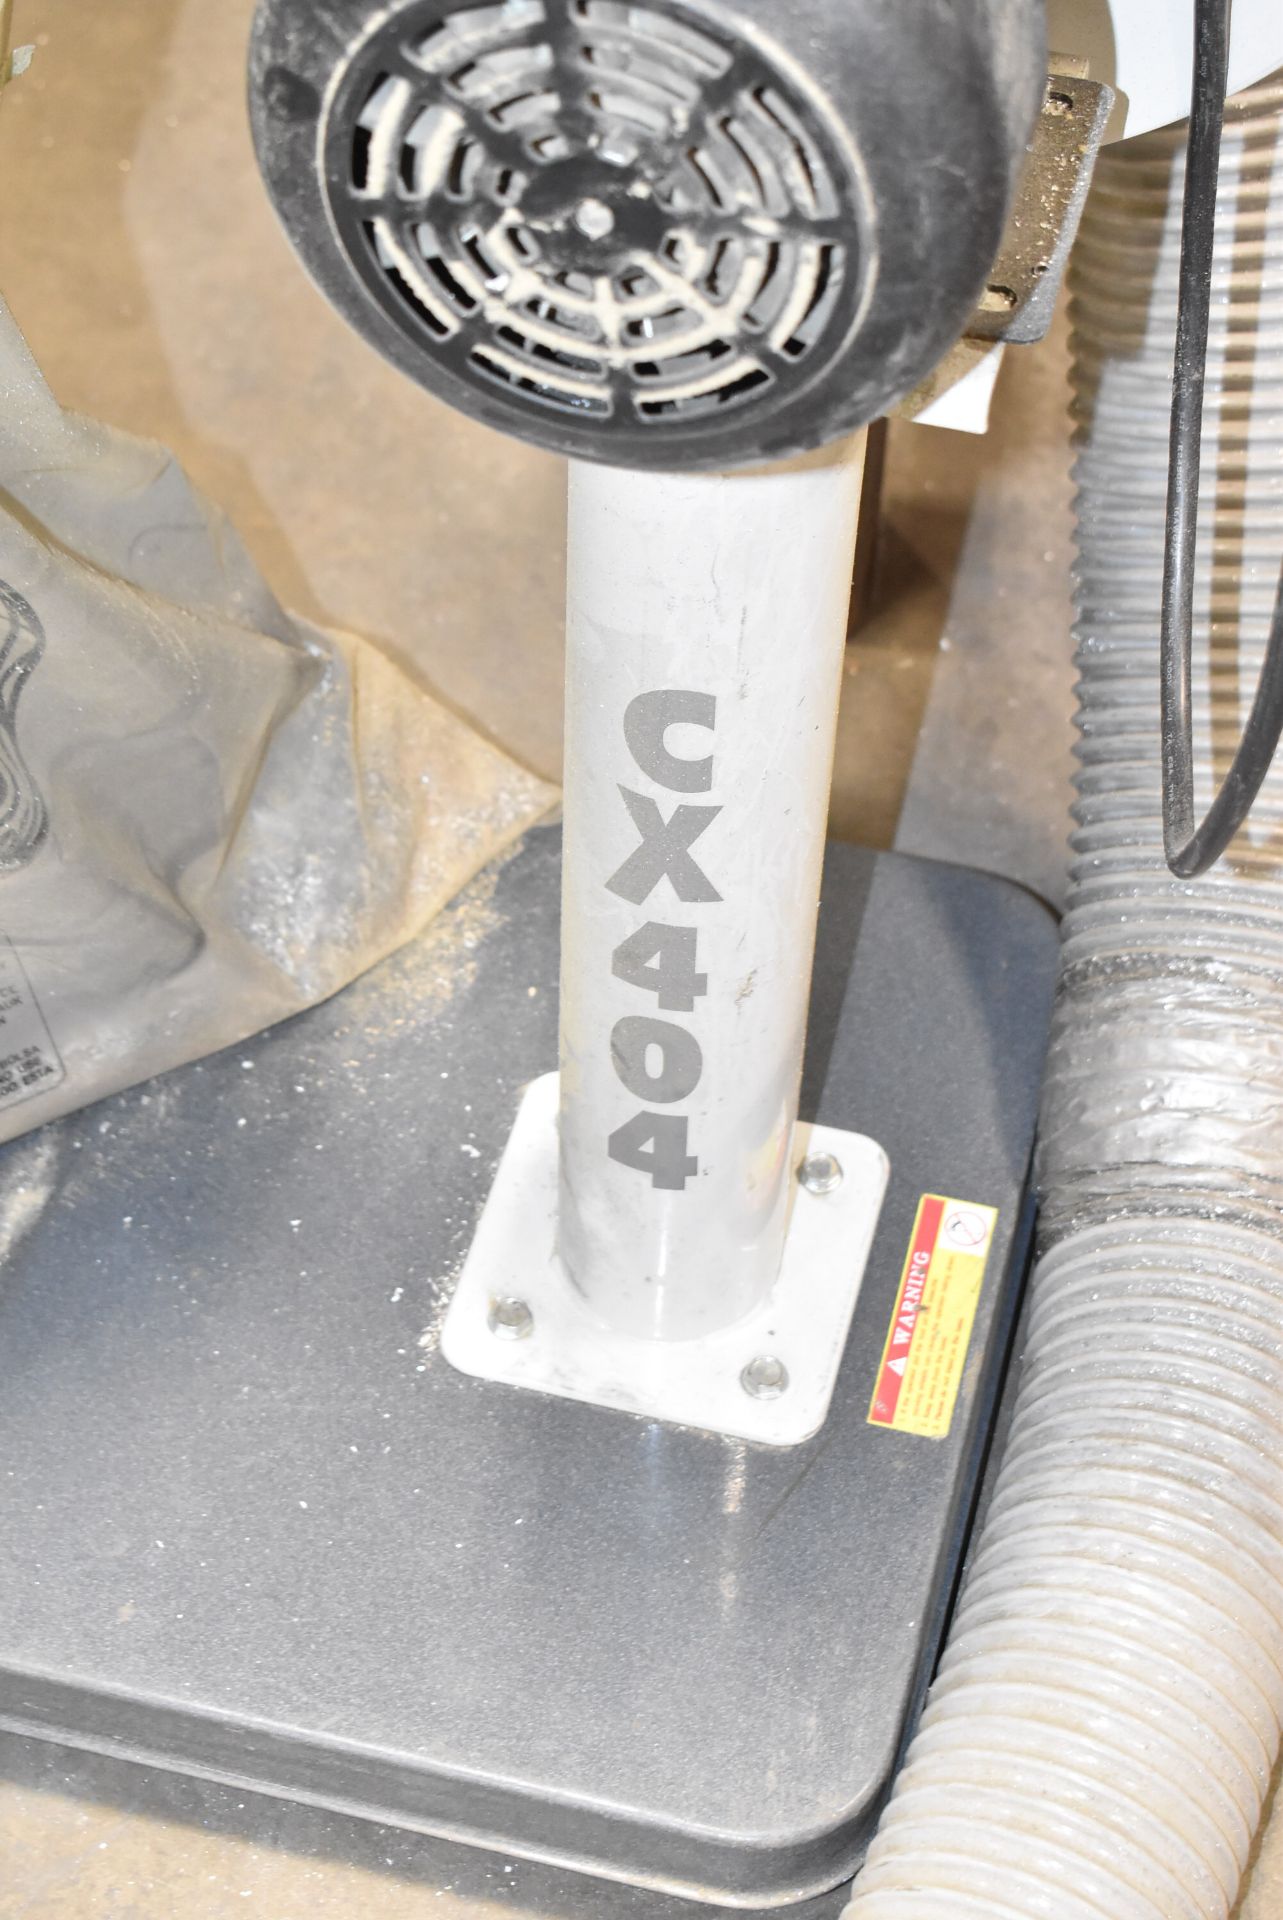 CRAFTEX CX-SERIES CX404 BAG TYPE DUST COLLECTOR S/N SY002589 [RIGGING FOR FOR LOT #27 - $25 CAD PLUS - Image 2 of 3